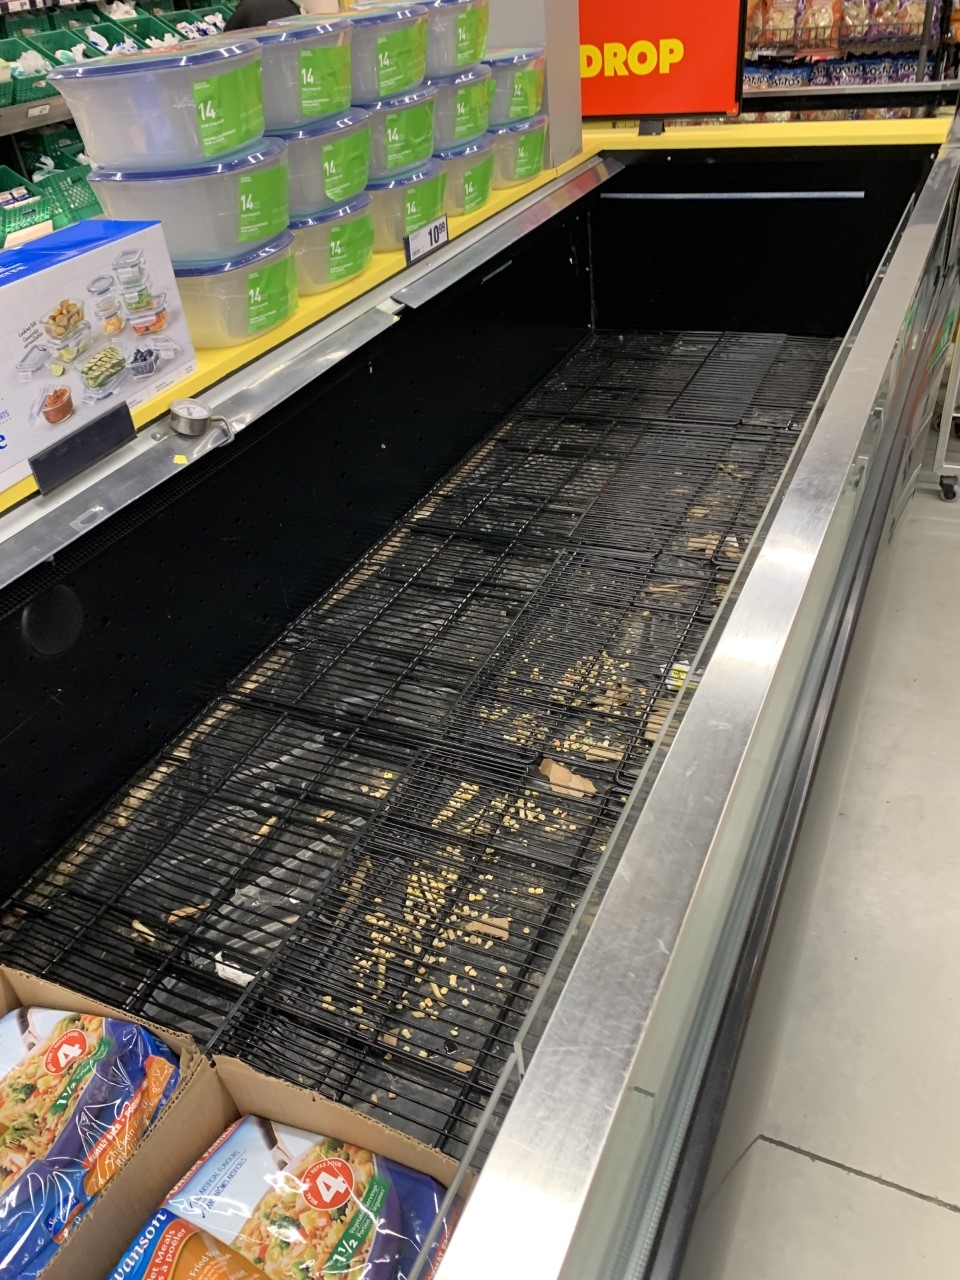  With Canada’s supply chain being threatened by the federal government’s vaccine mandate for truckers crossing the border, it wasn’t hard to find empty shelves at this grocery story in Etobicoke on Friday, Jan. 21, 2022.